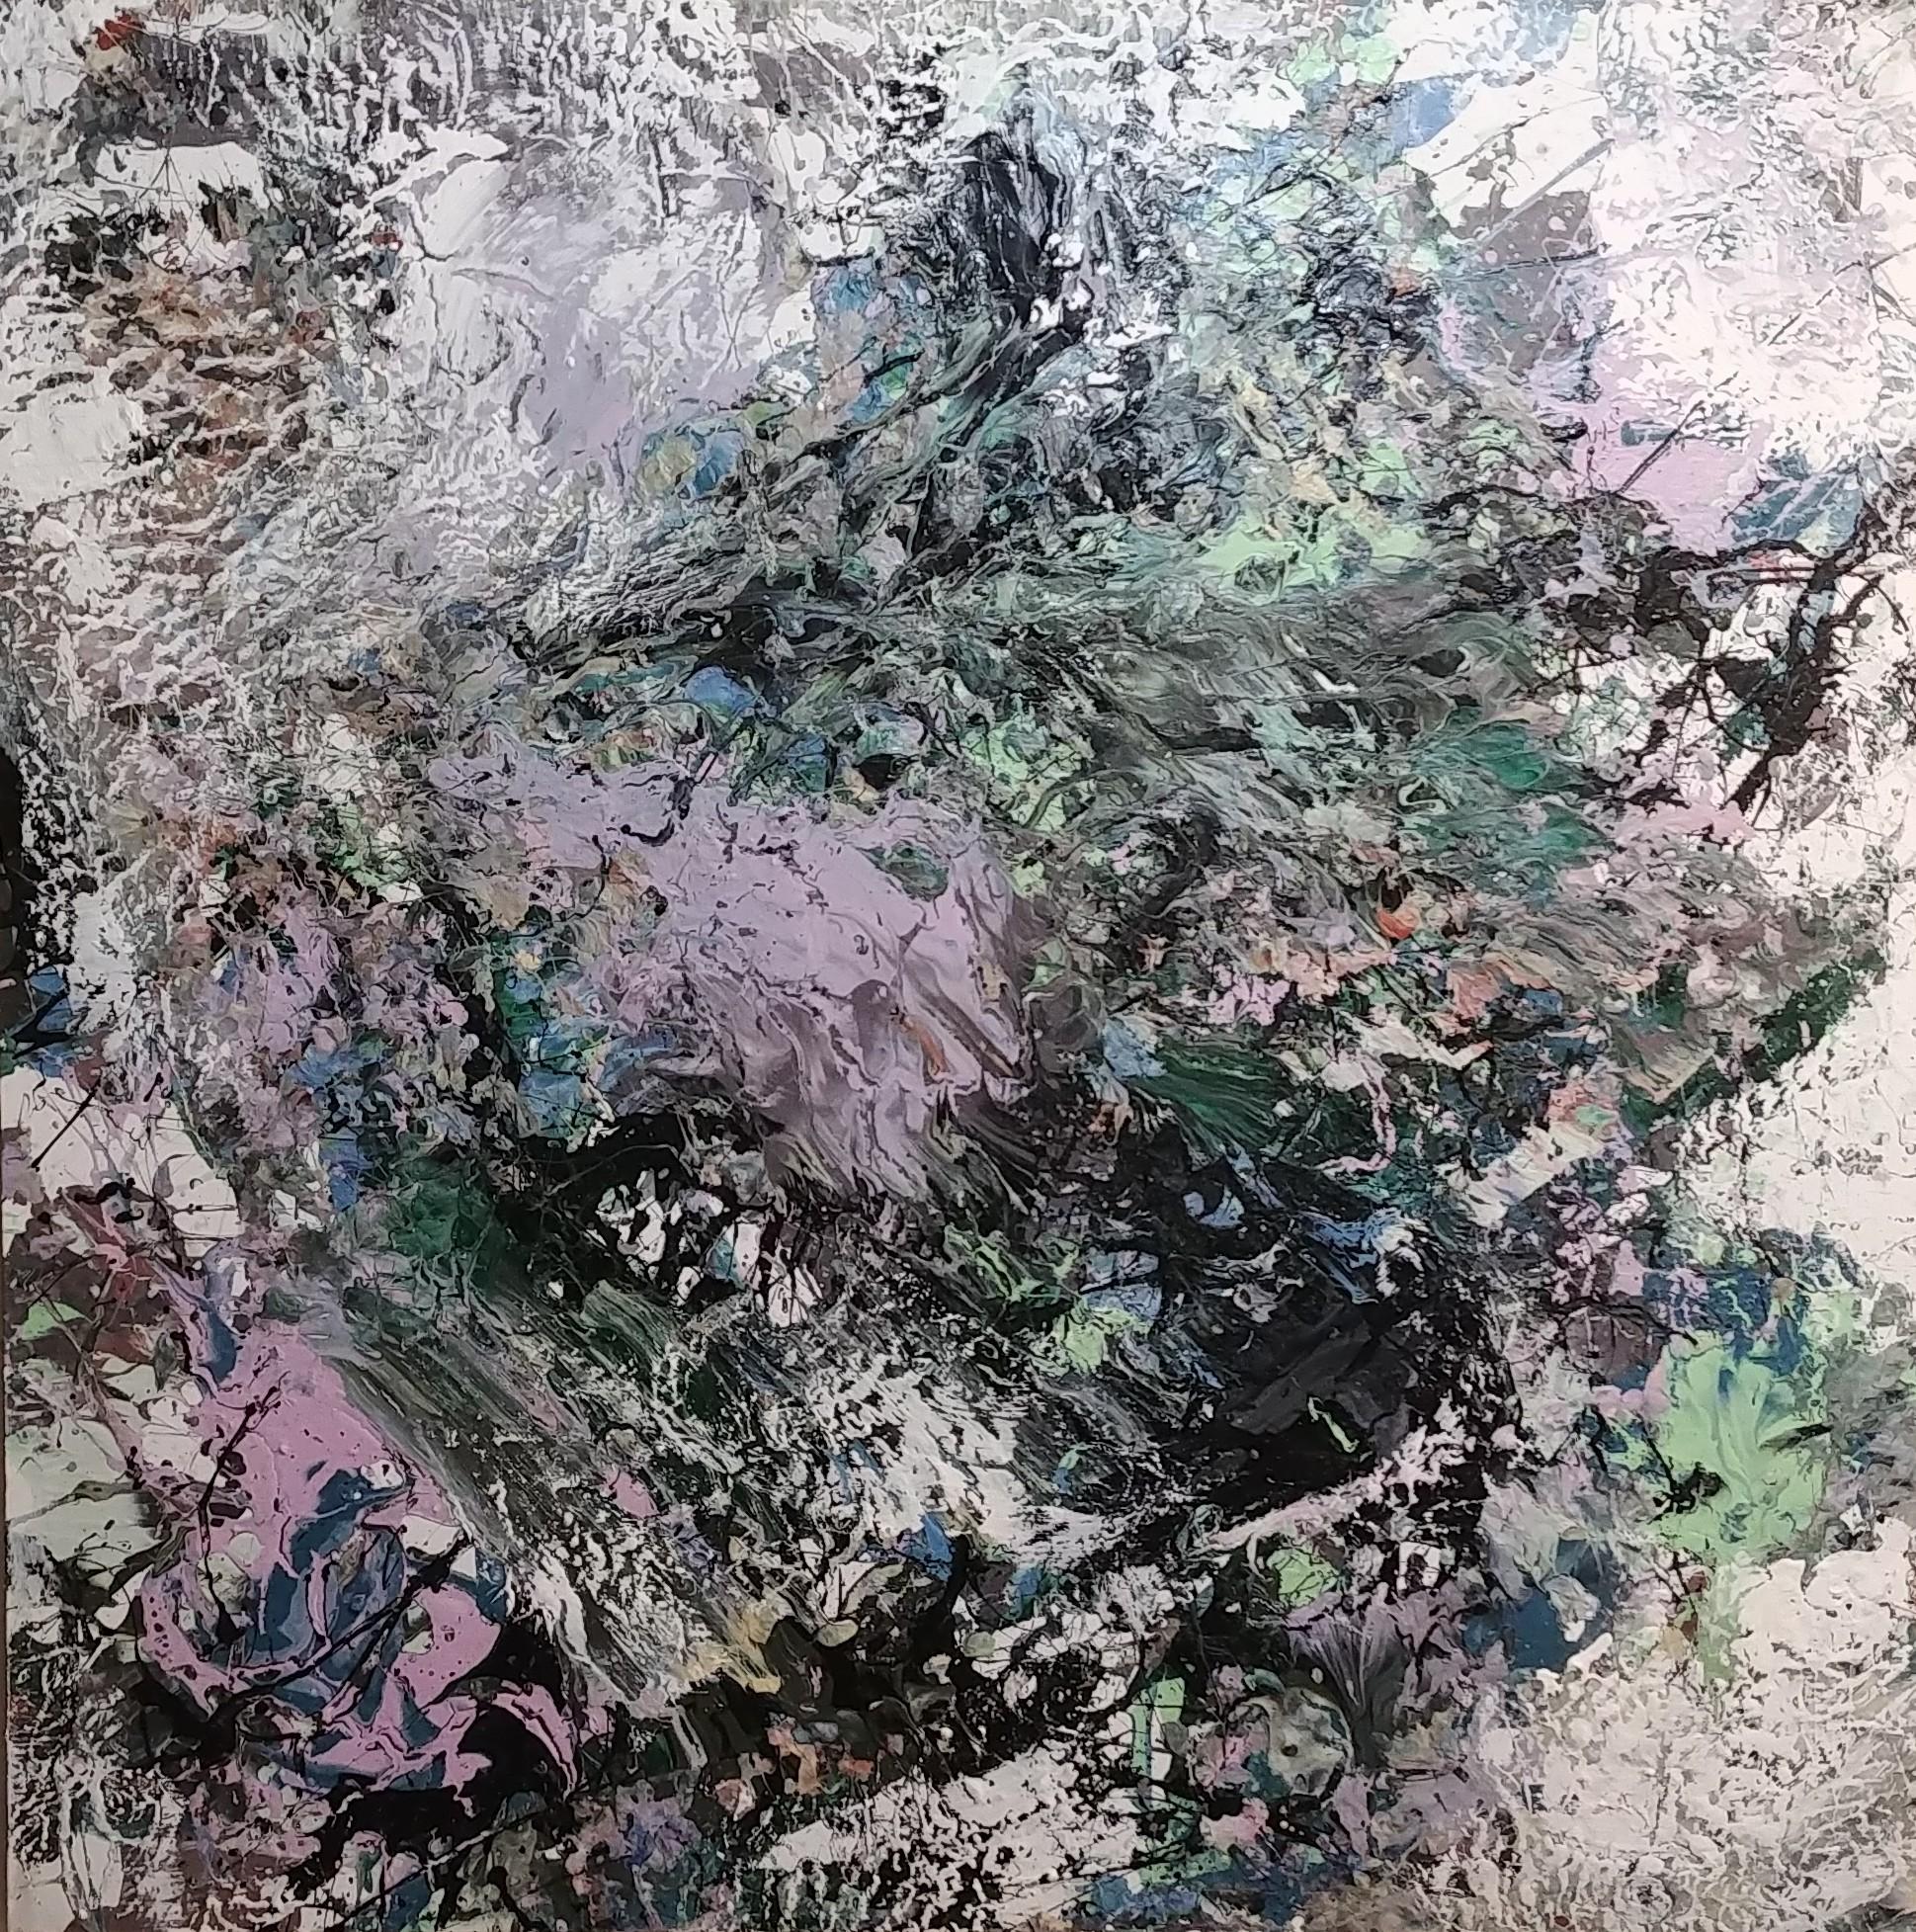 Abstract Painting Nancy Seibert - 48 x 48 pouces